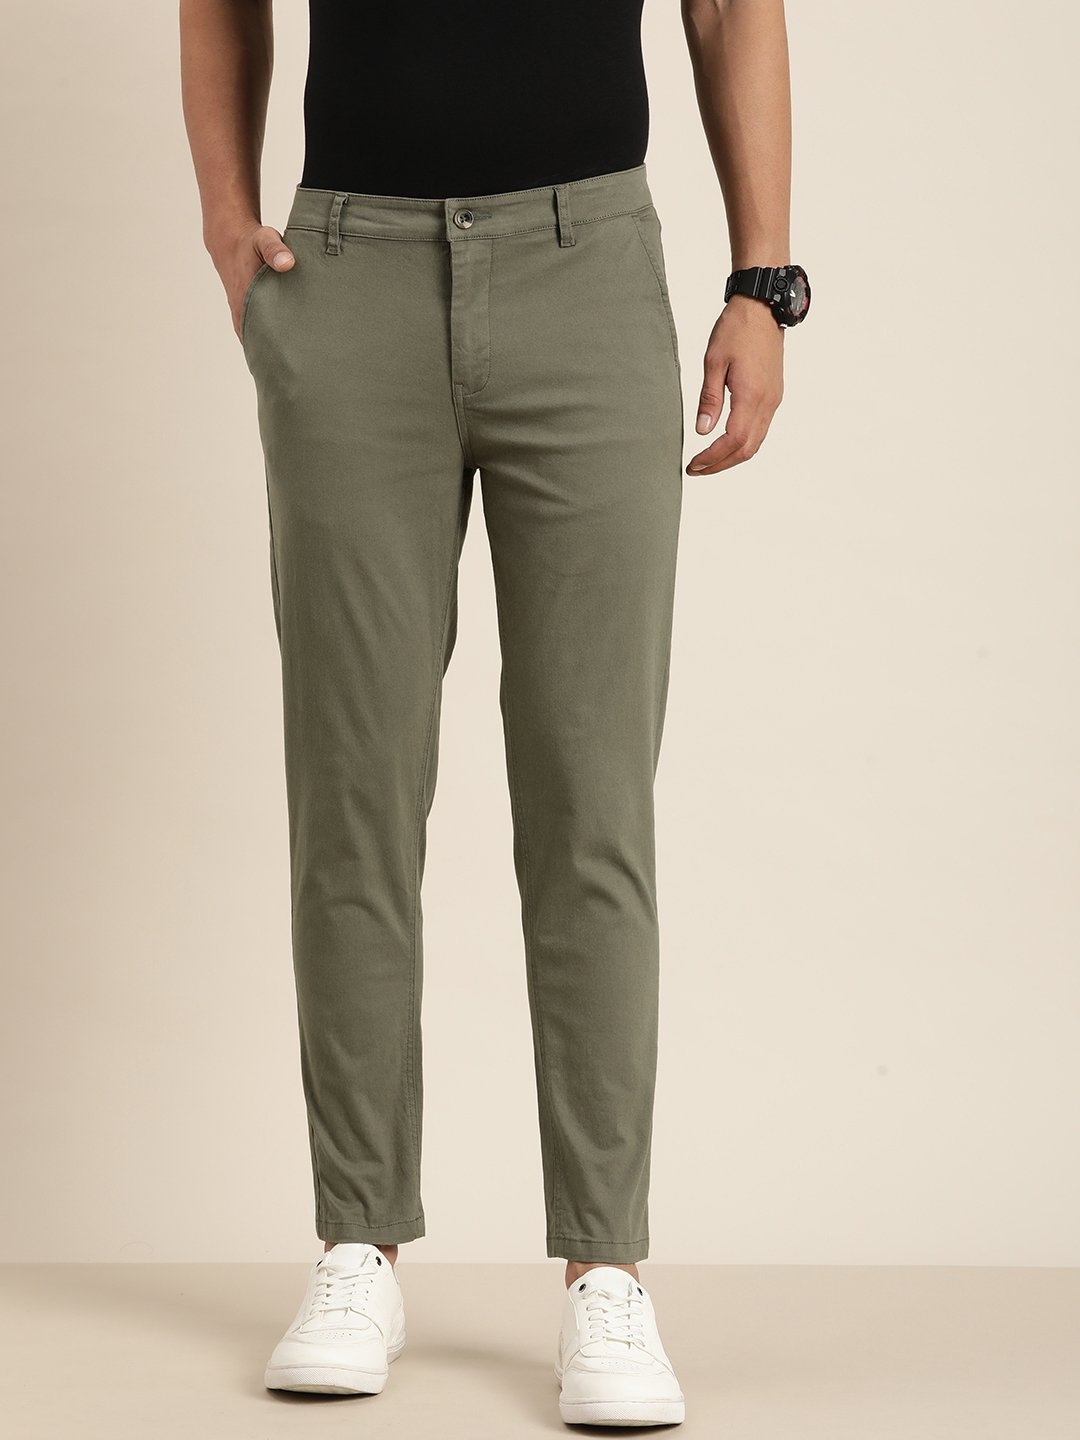 Difference of Opinion | Difference of Opinion Olive Solid Angle Length Trouser